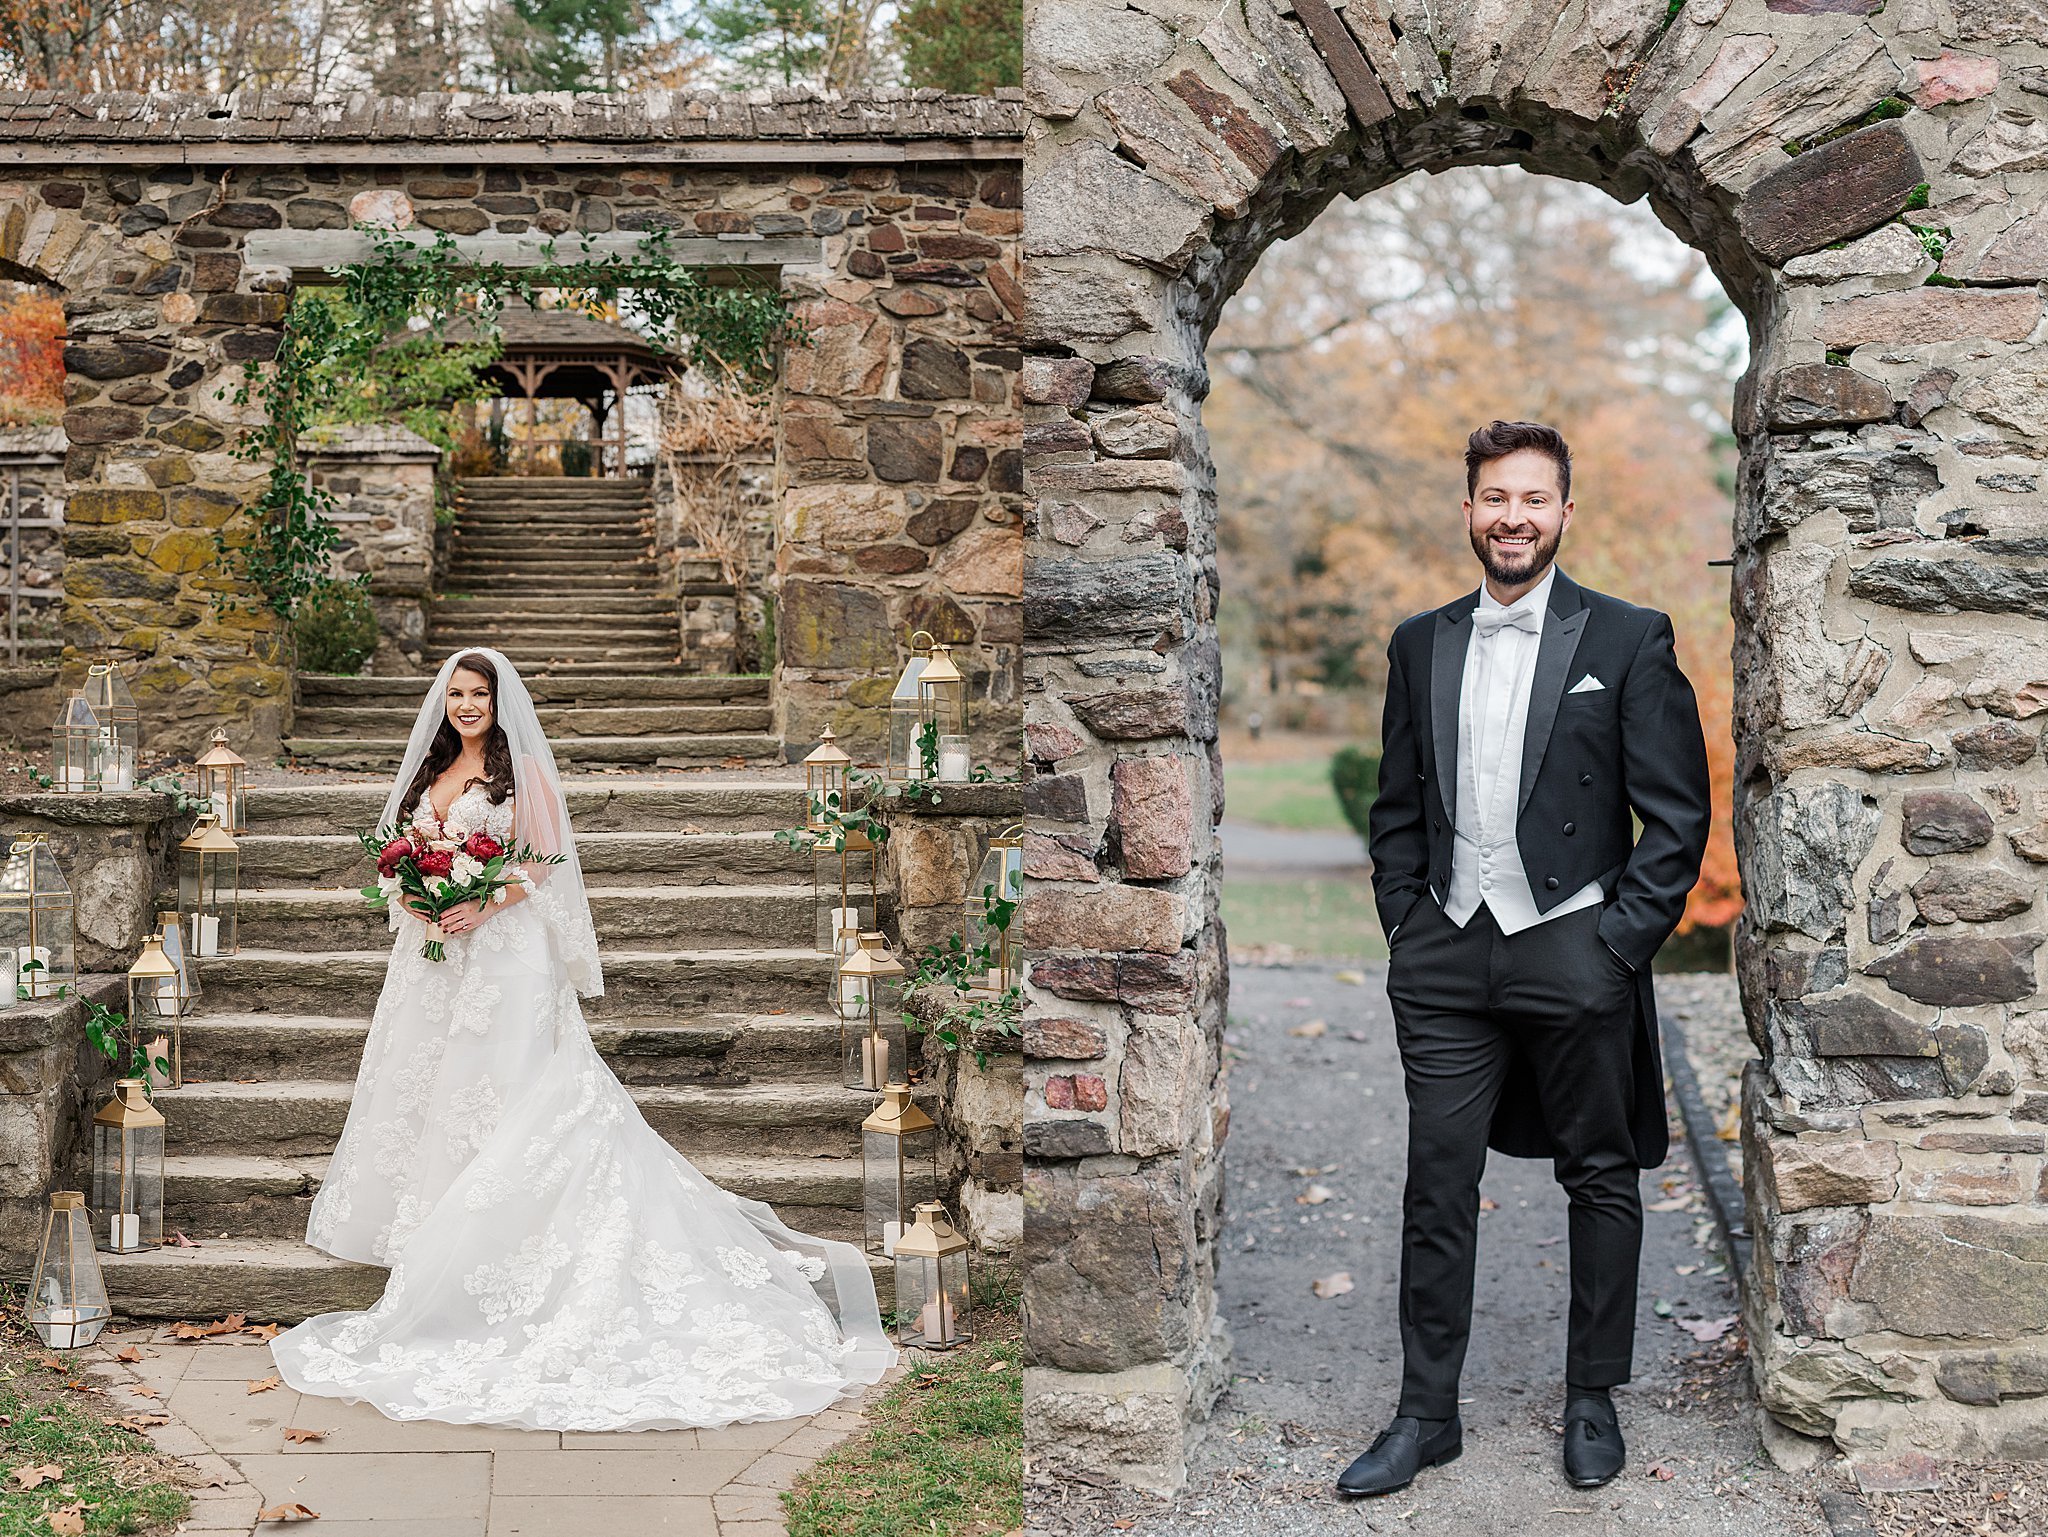 Hunting Hill Mansion Parque Ridley Creek Park Newtown Sauare PA Luxury Autumn Wedding Photography_3942.jpg